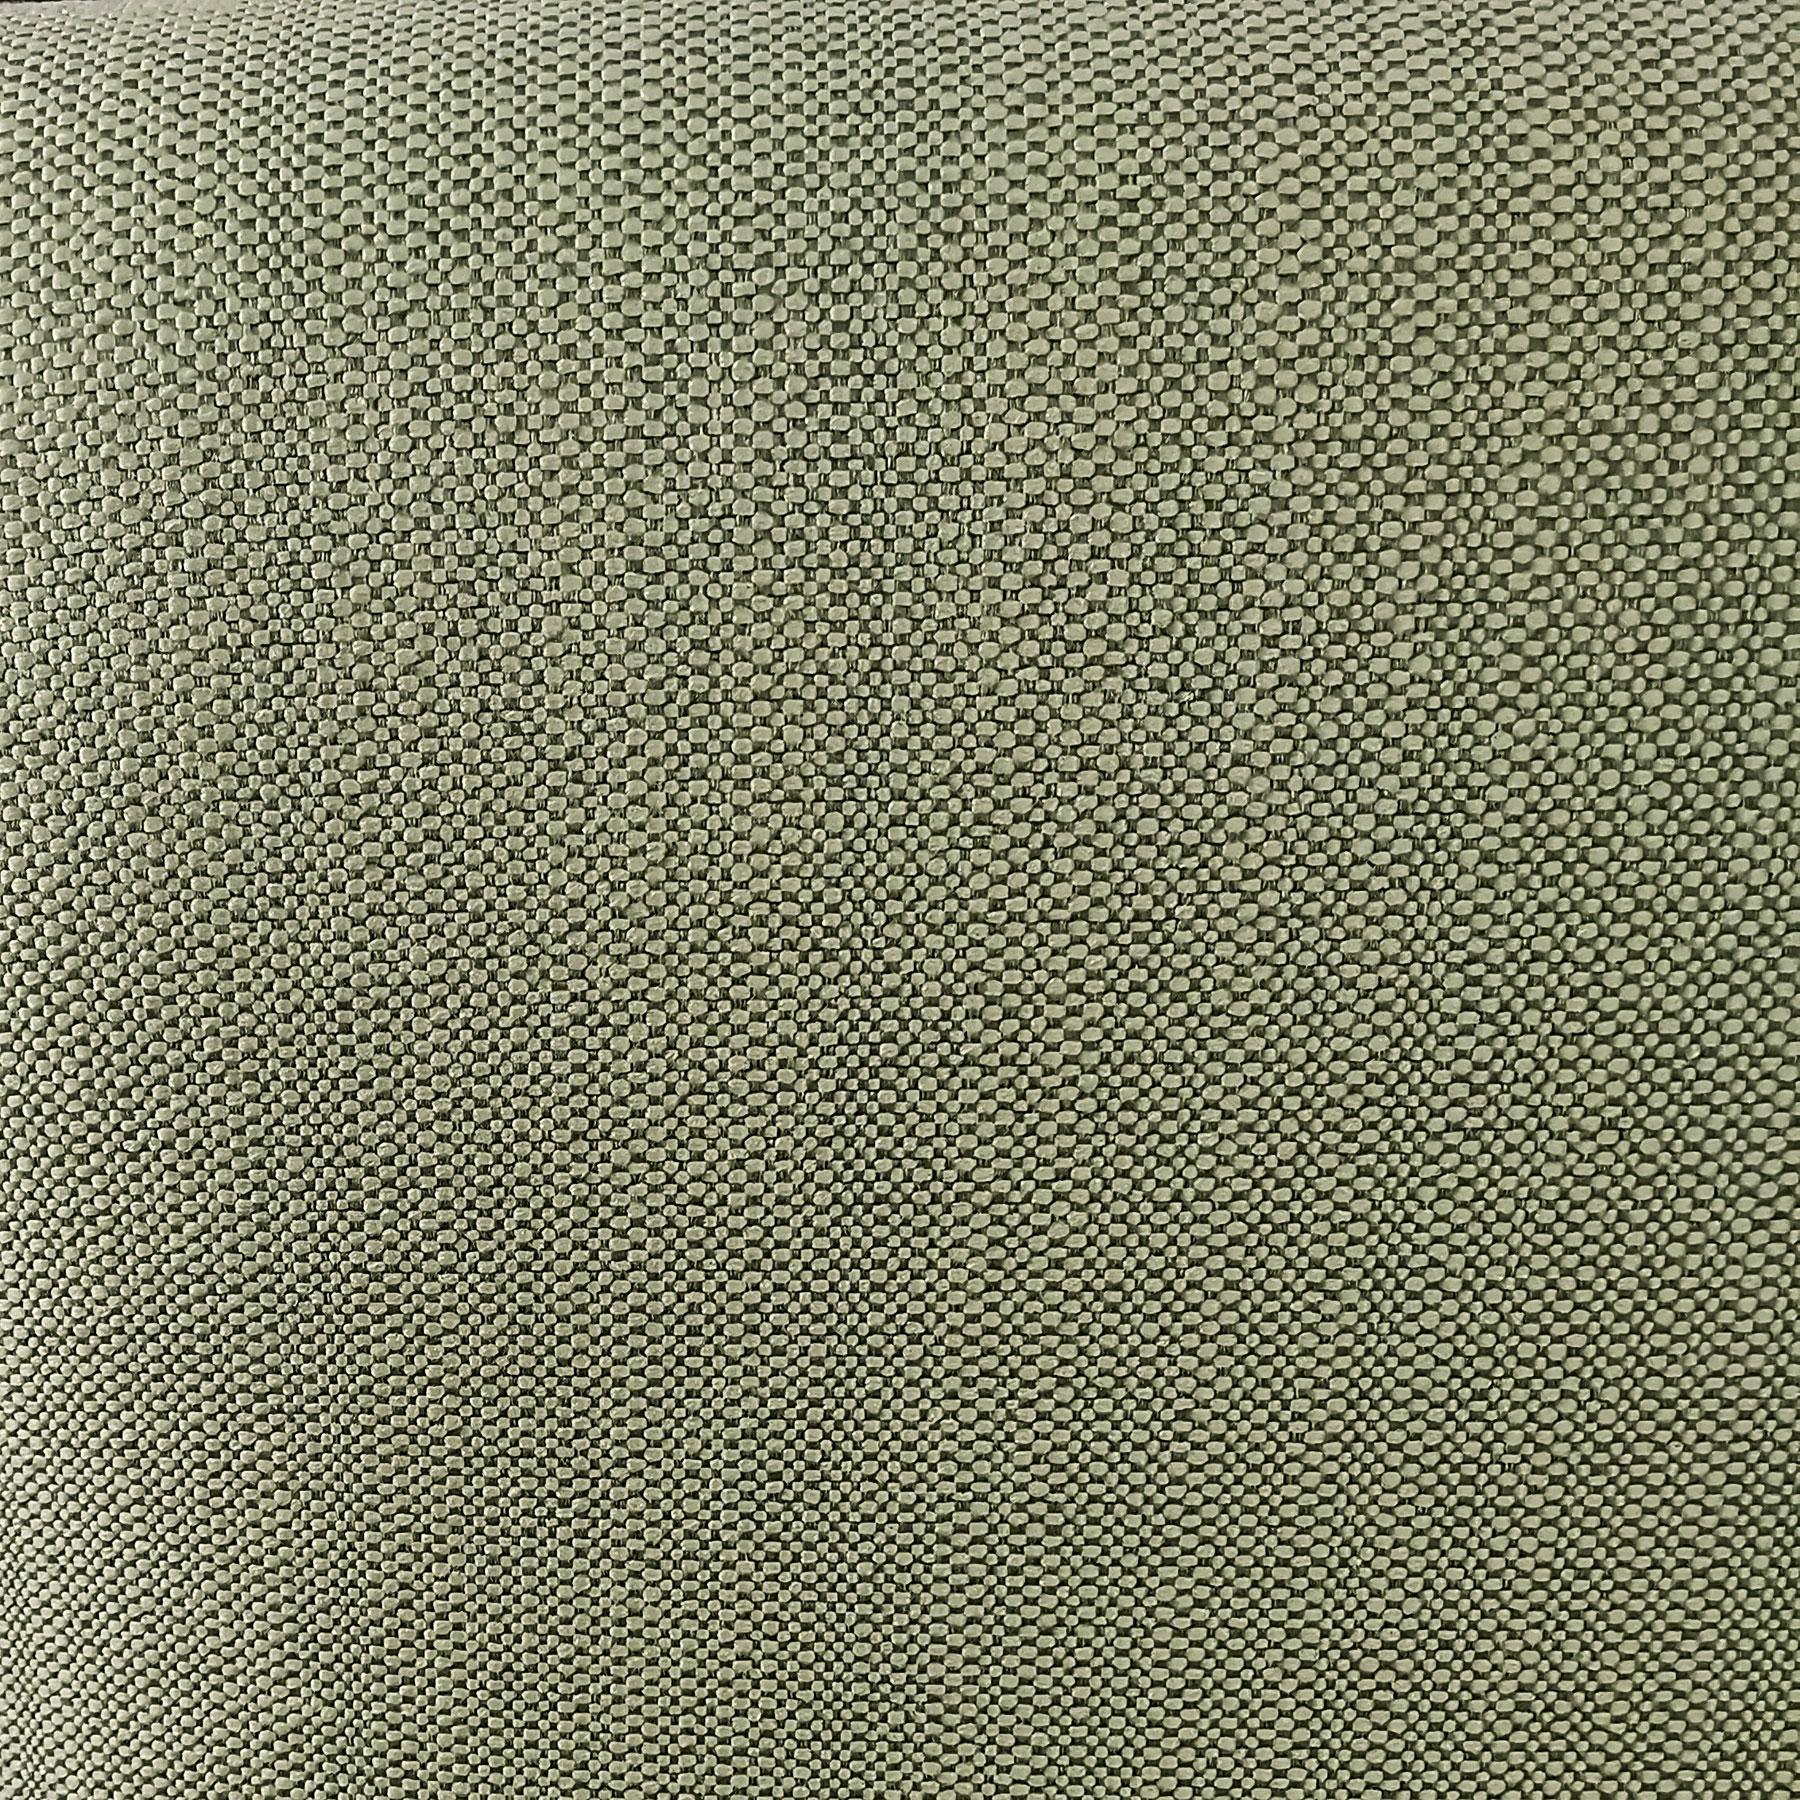 Pair of Mid-Century Modern Armchairs, Beech Wood and Green Flecked Fabric- Italy For Sale 3